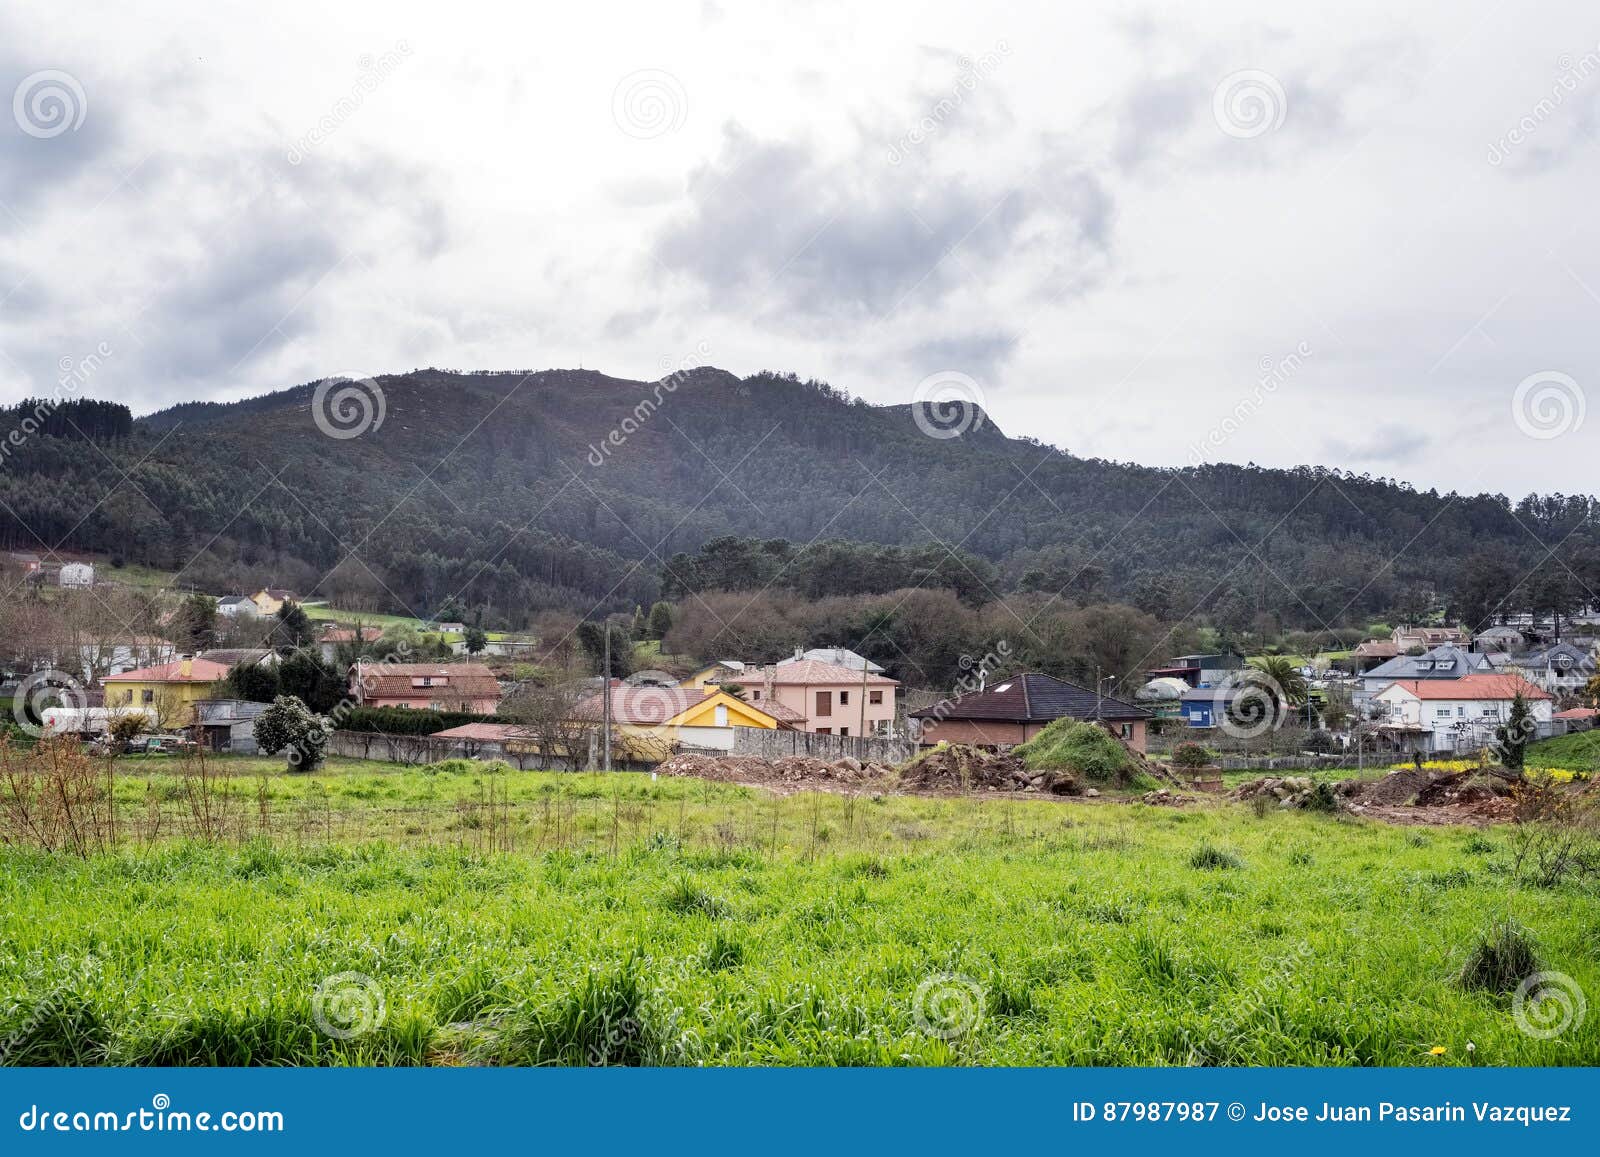 the countryside in galicia near a village called ledoÃÂ±o on a ra